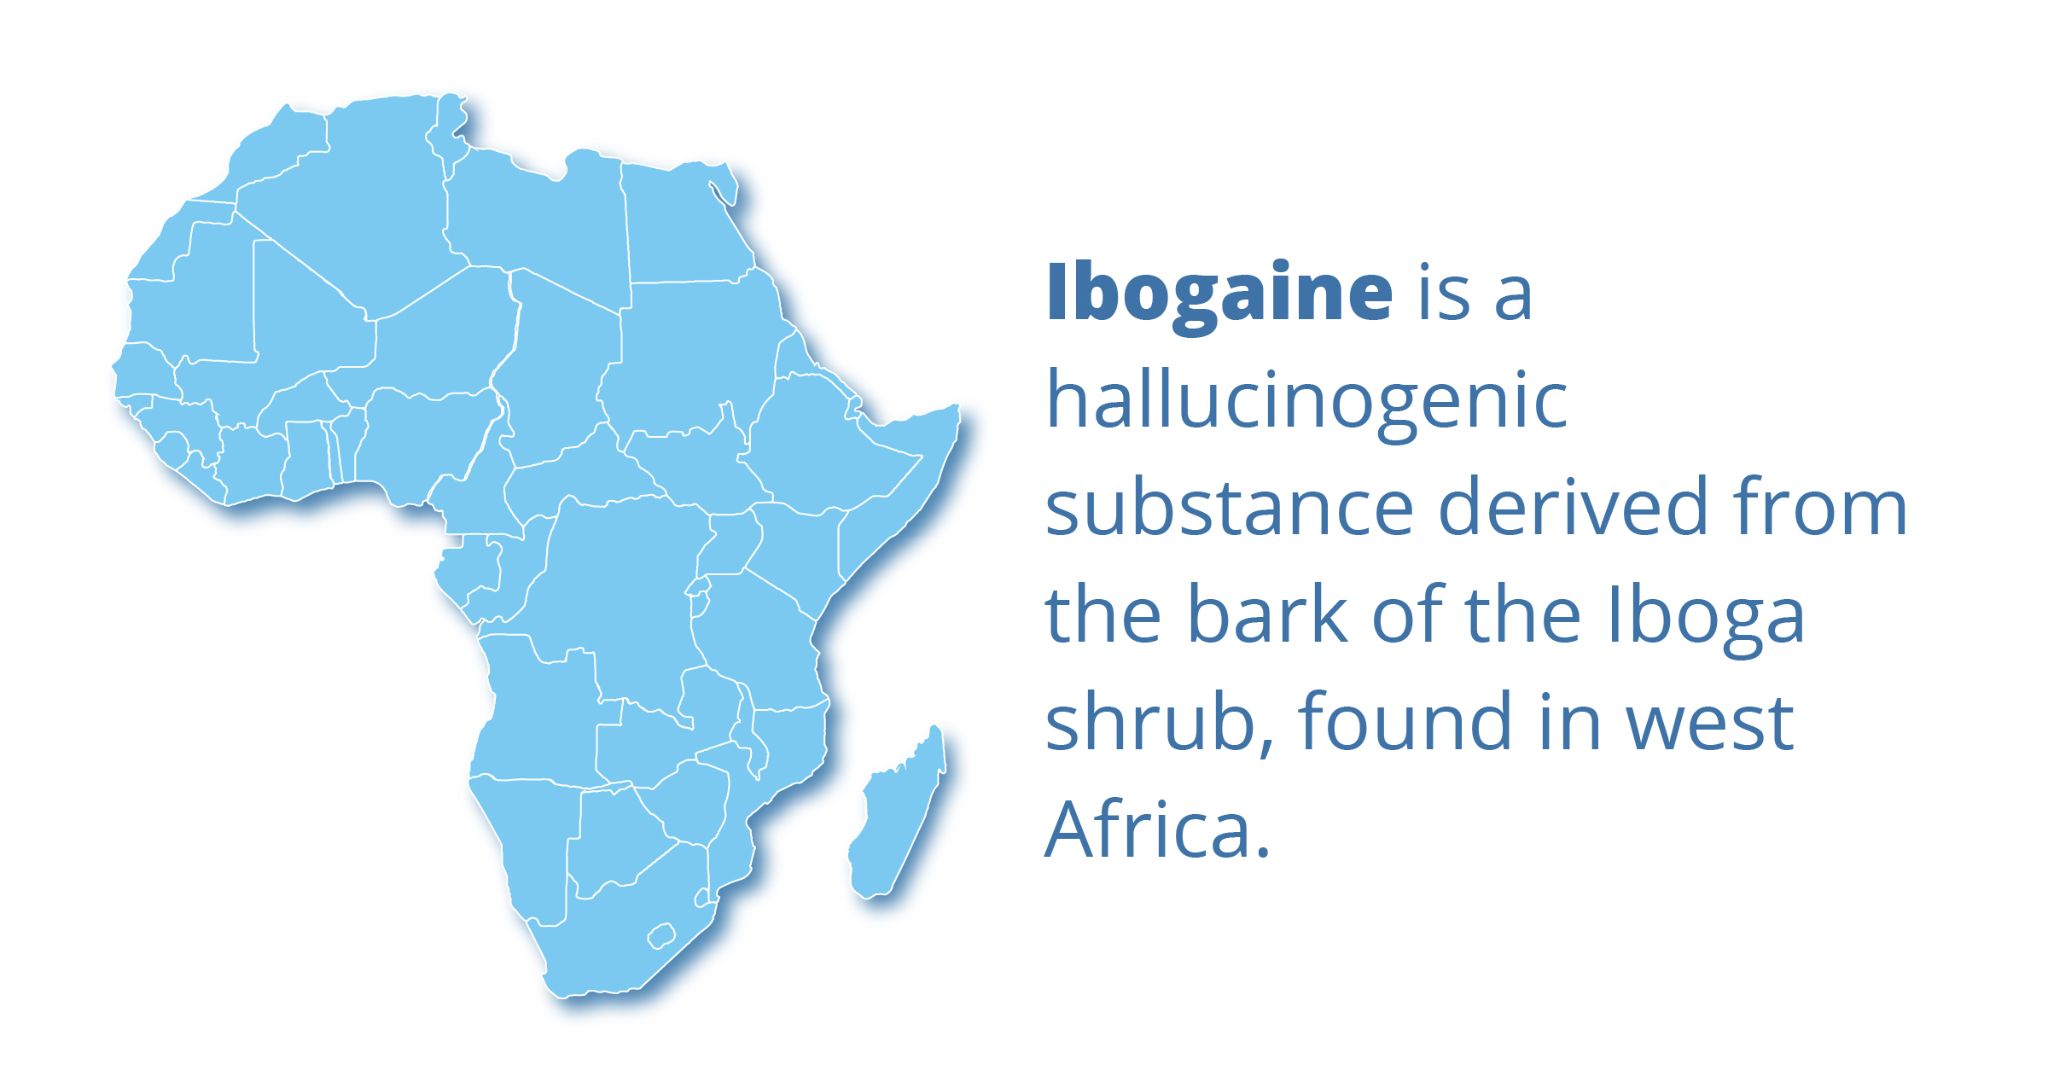 Ibogaine is a hallucinogenic substance derived from the bark of the iboga shrub, found in west Africa